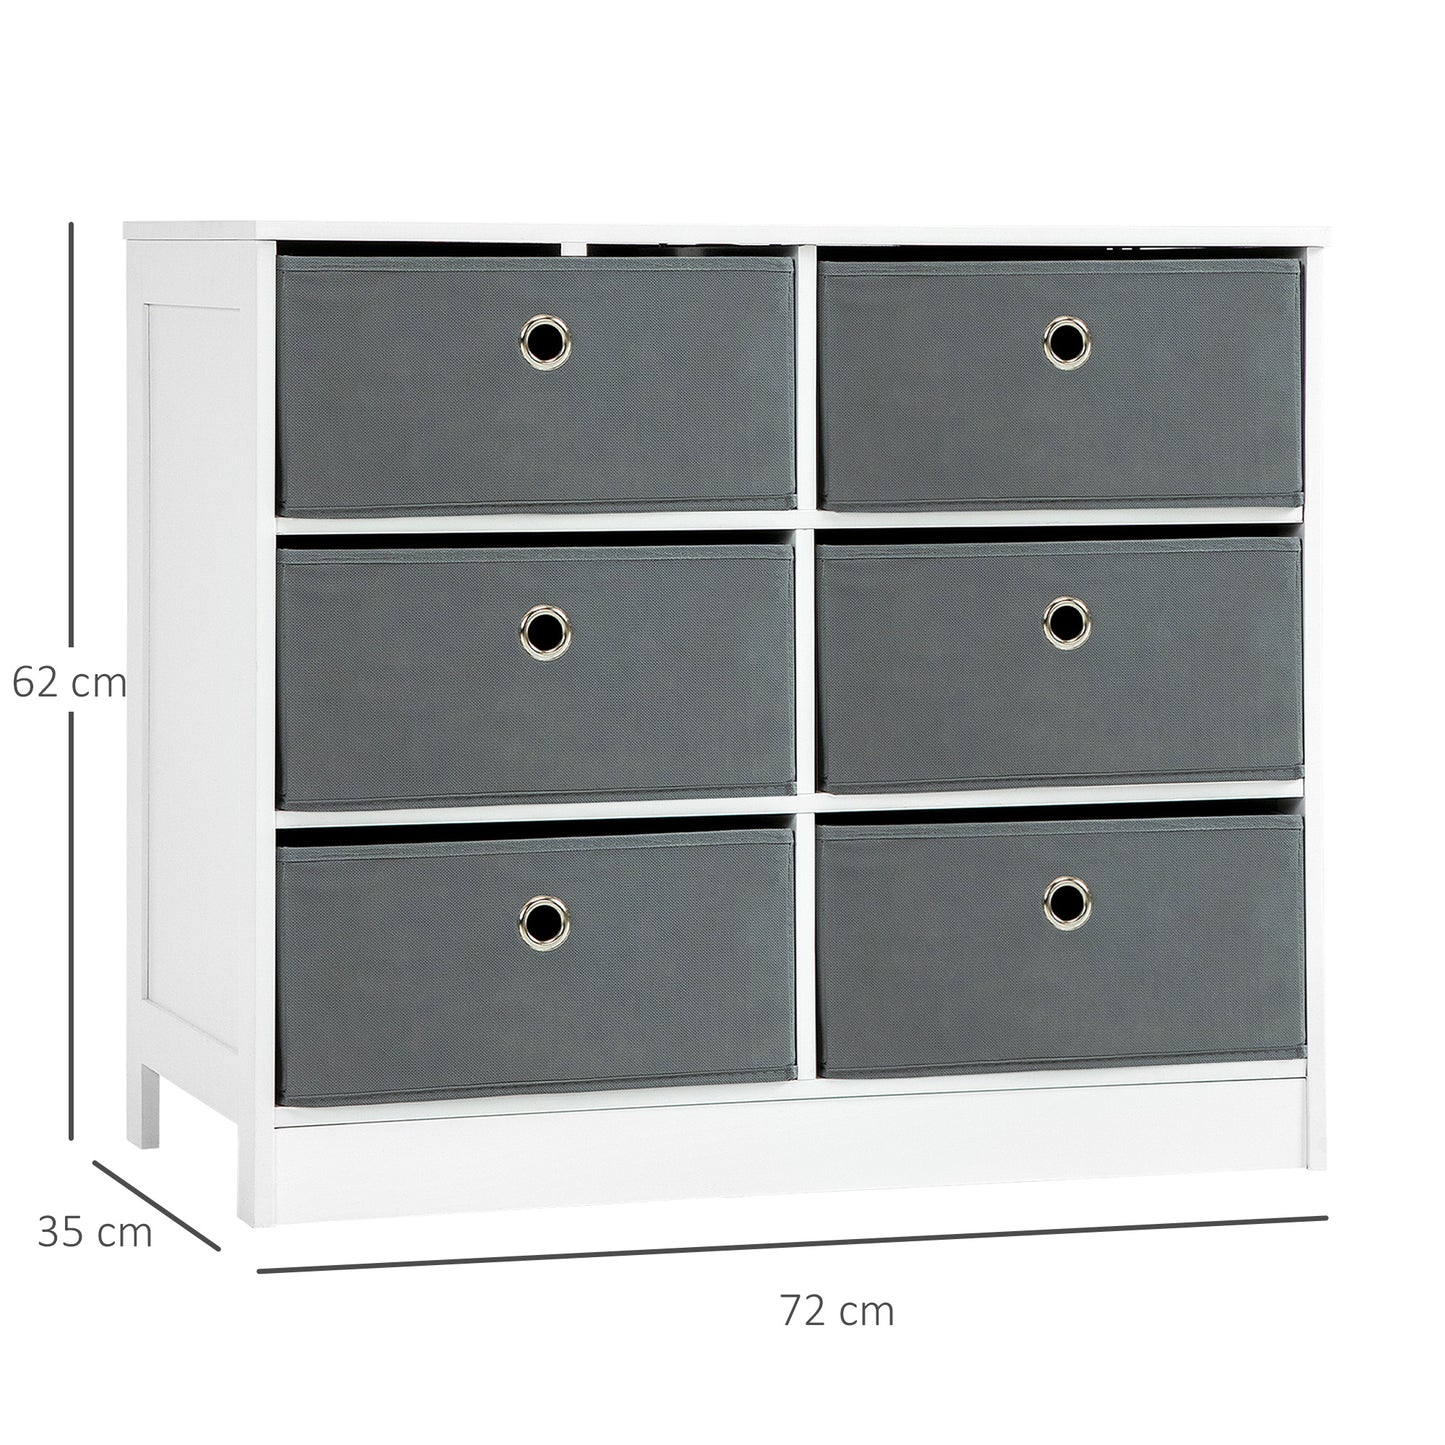 HOMCOM Chests of Drawer, Fabric Dresser Storage Cabinet with 6 Drawers for Bedroom, Living Room and Hallway, White and Grey w/